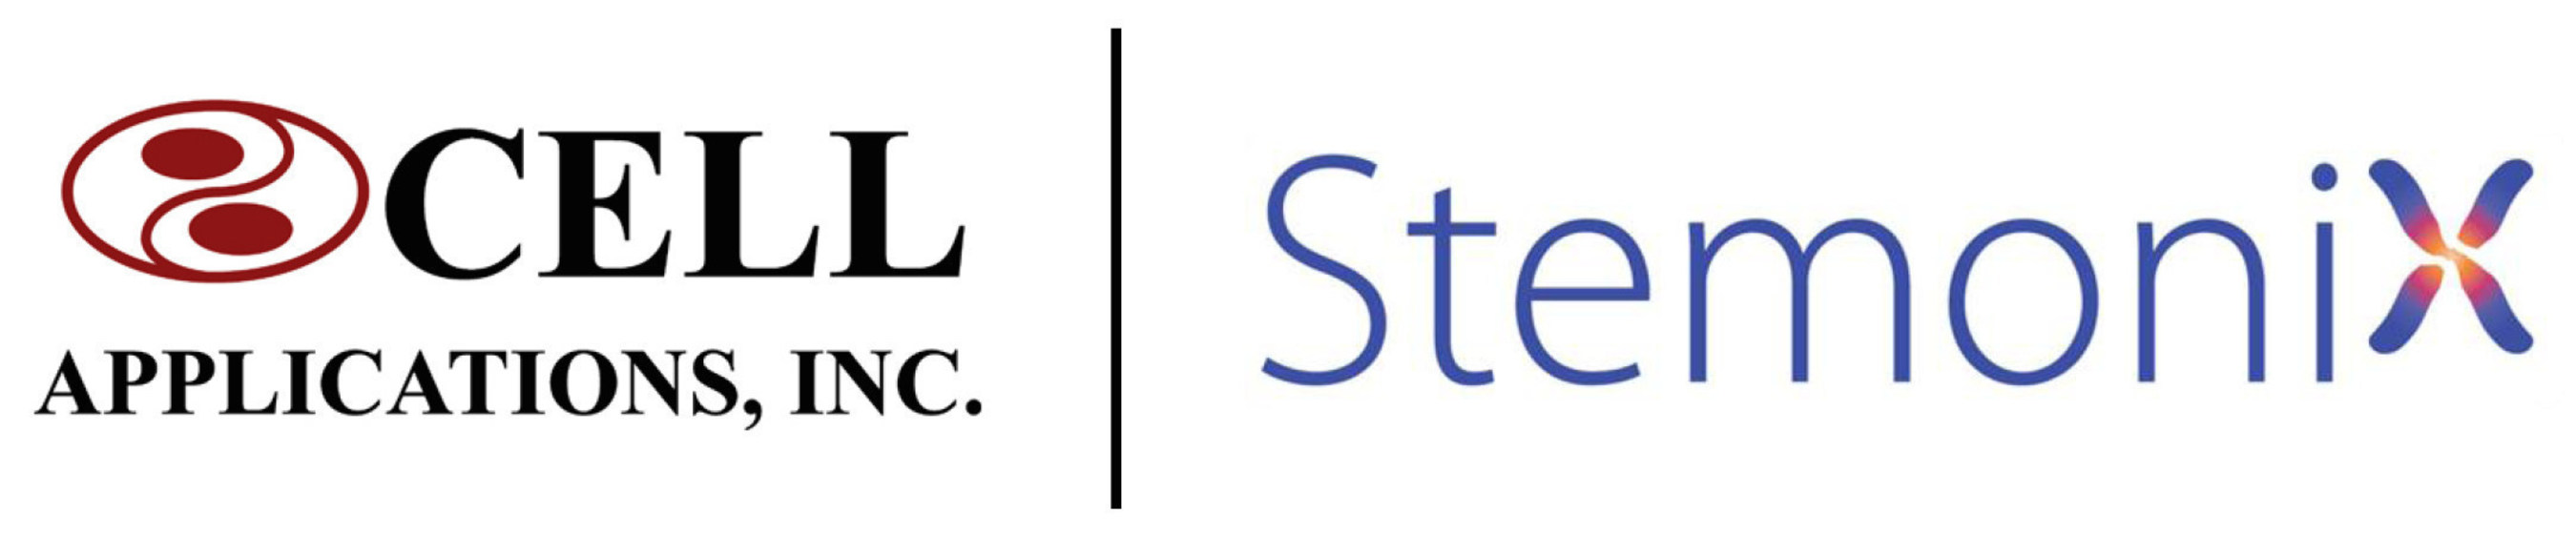 Cell Applications, Inc. and StemoniX have announced a partnership that will allow them to produce up to one billion human induced pluripotent stem cells (HiPSC) from one lot within one week.